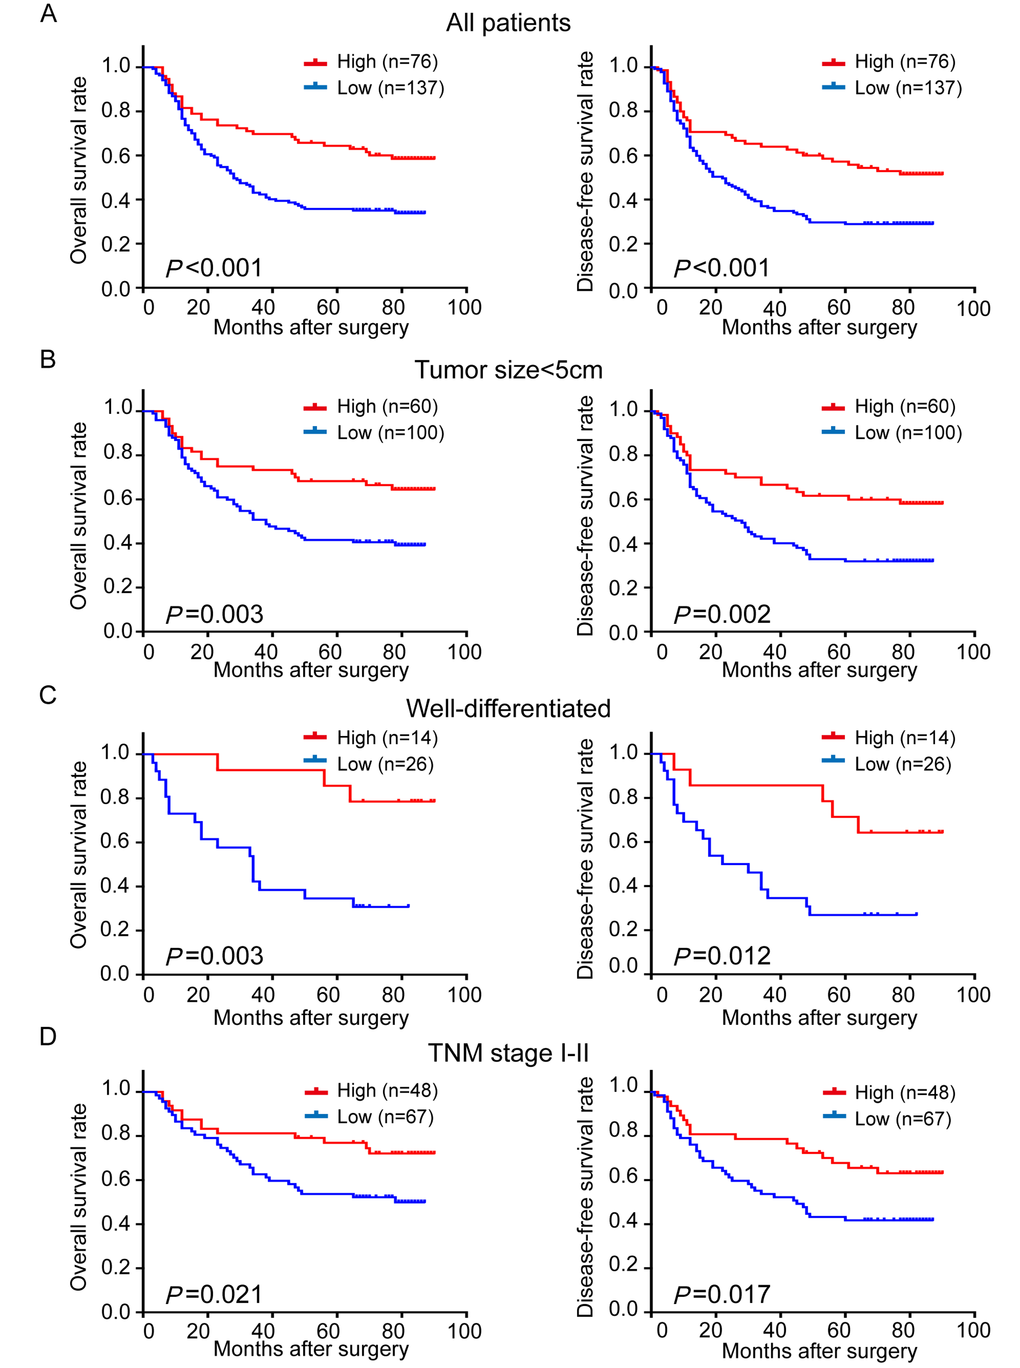 Comparison of overall survival (OS) and disease-free survival (DFS) in ESCC patients with high- and low-expression of TRIM24 protein. (A) The survival curves (OS, left panel; DFS, right panel) of patients with high and low TRIM24 protein expressions. (B) – (D) Stratified survival analysis in patients with tumor size B), well differentiation (C) and pathological TNM stage I – II (D).